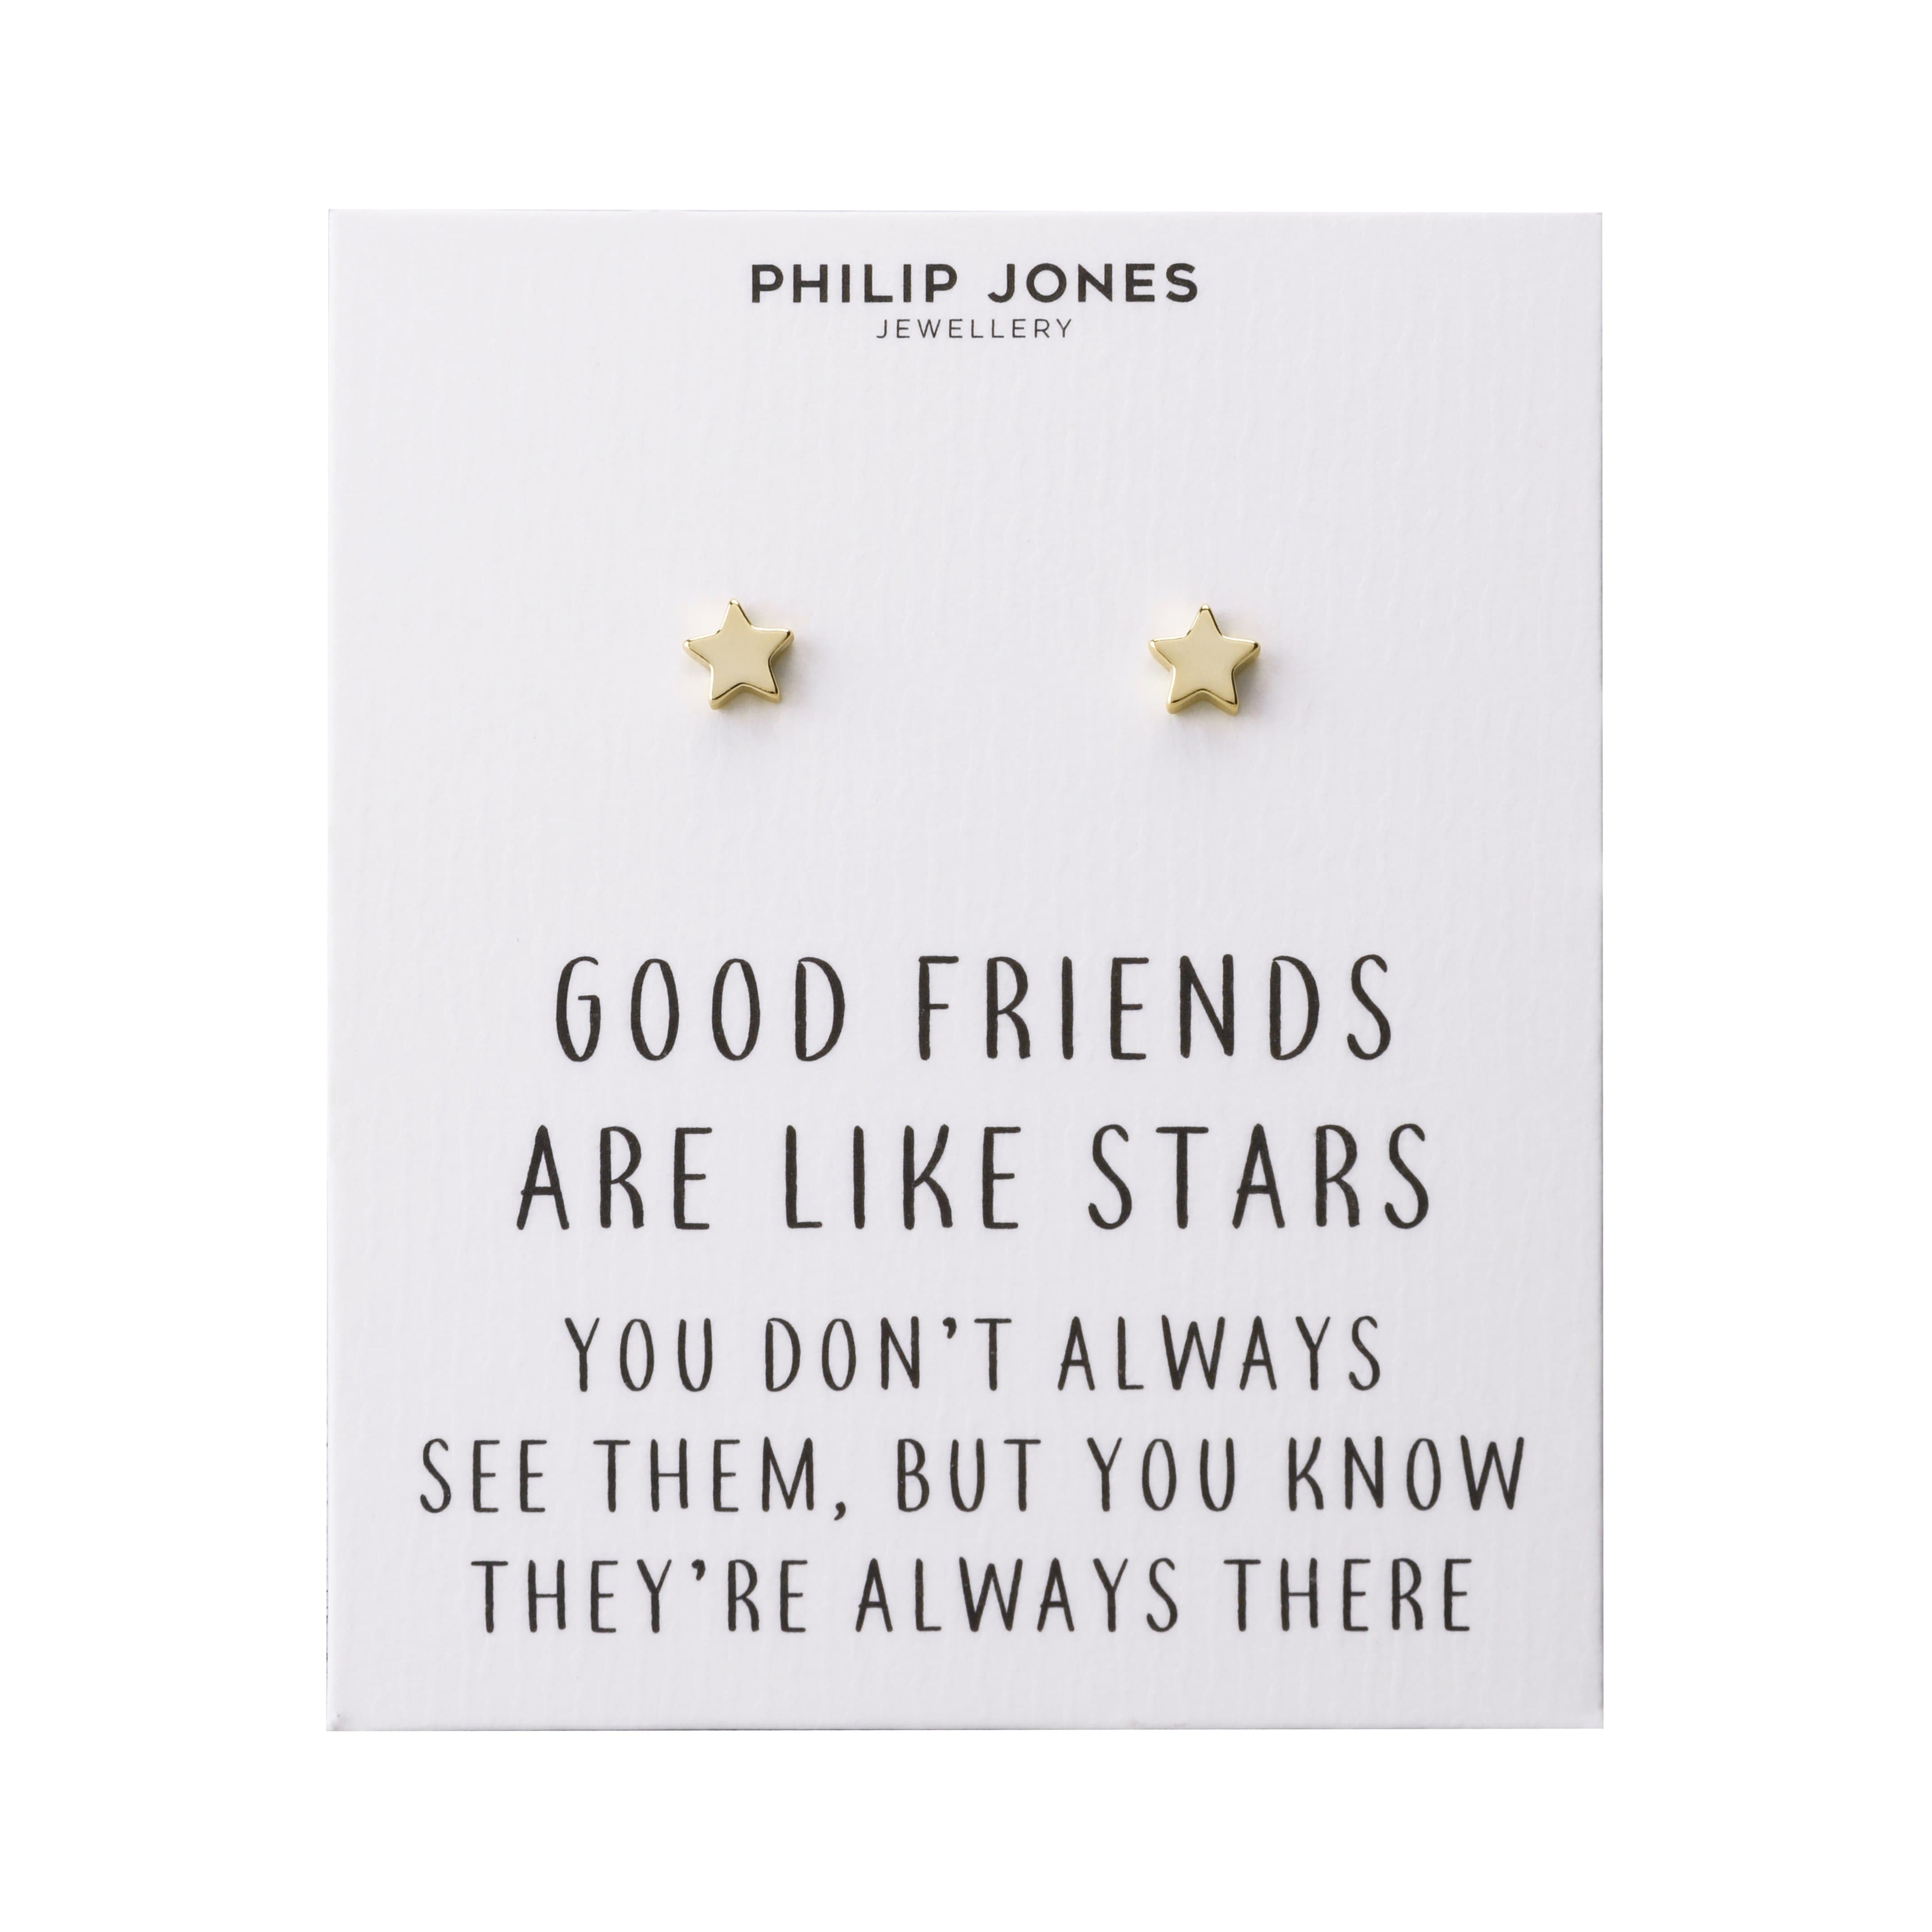 Gold Plated Star Stud Earrings with Quote Card by Philip Jones Jewellery